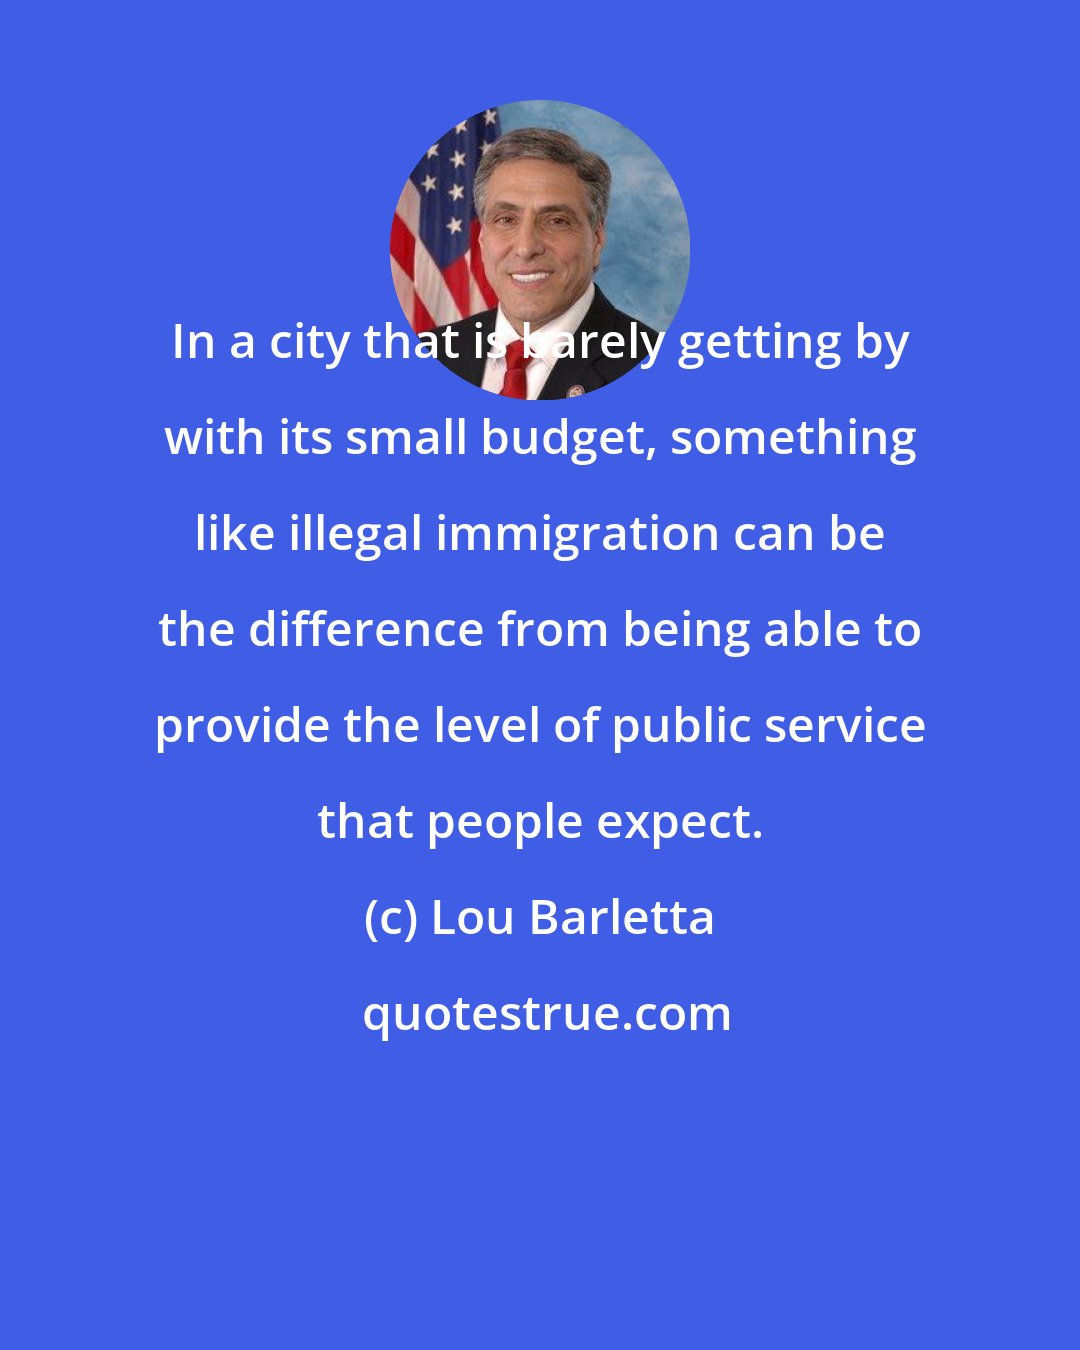 Lou Barletta: In a city that is barely getting by with its small budget, something like illegal immigration can be the difference from being able to provide the level of public service that people expect.